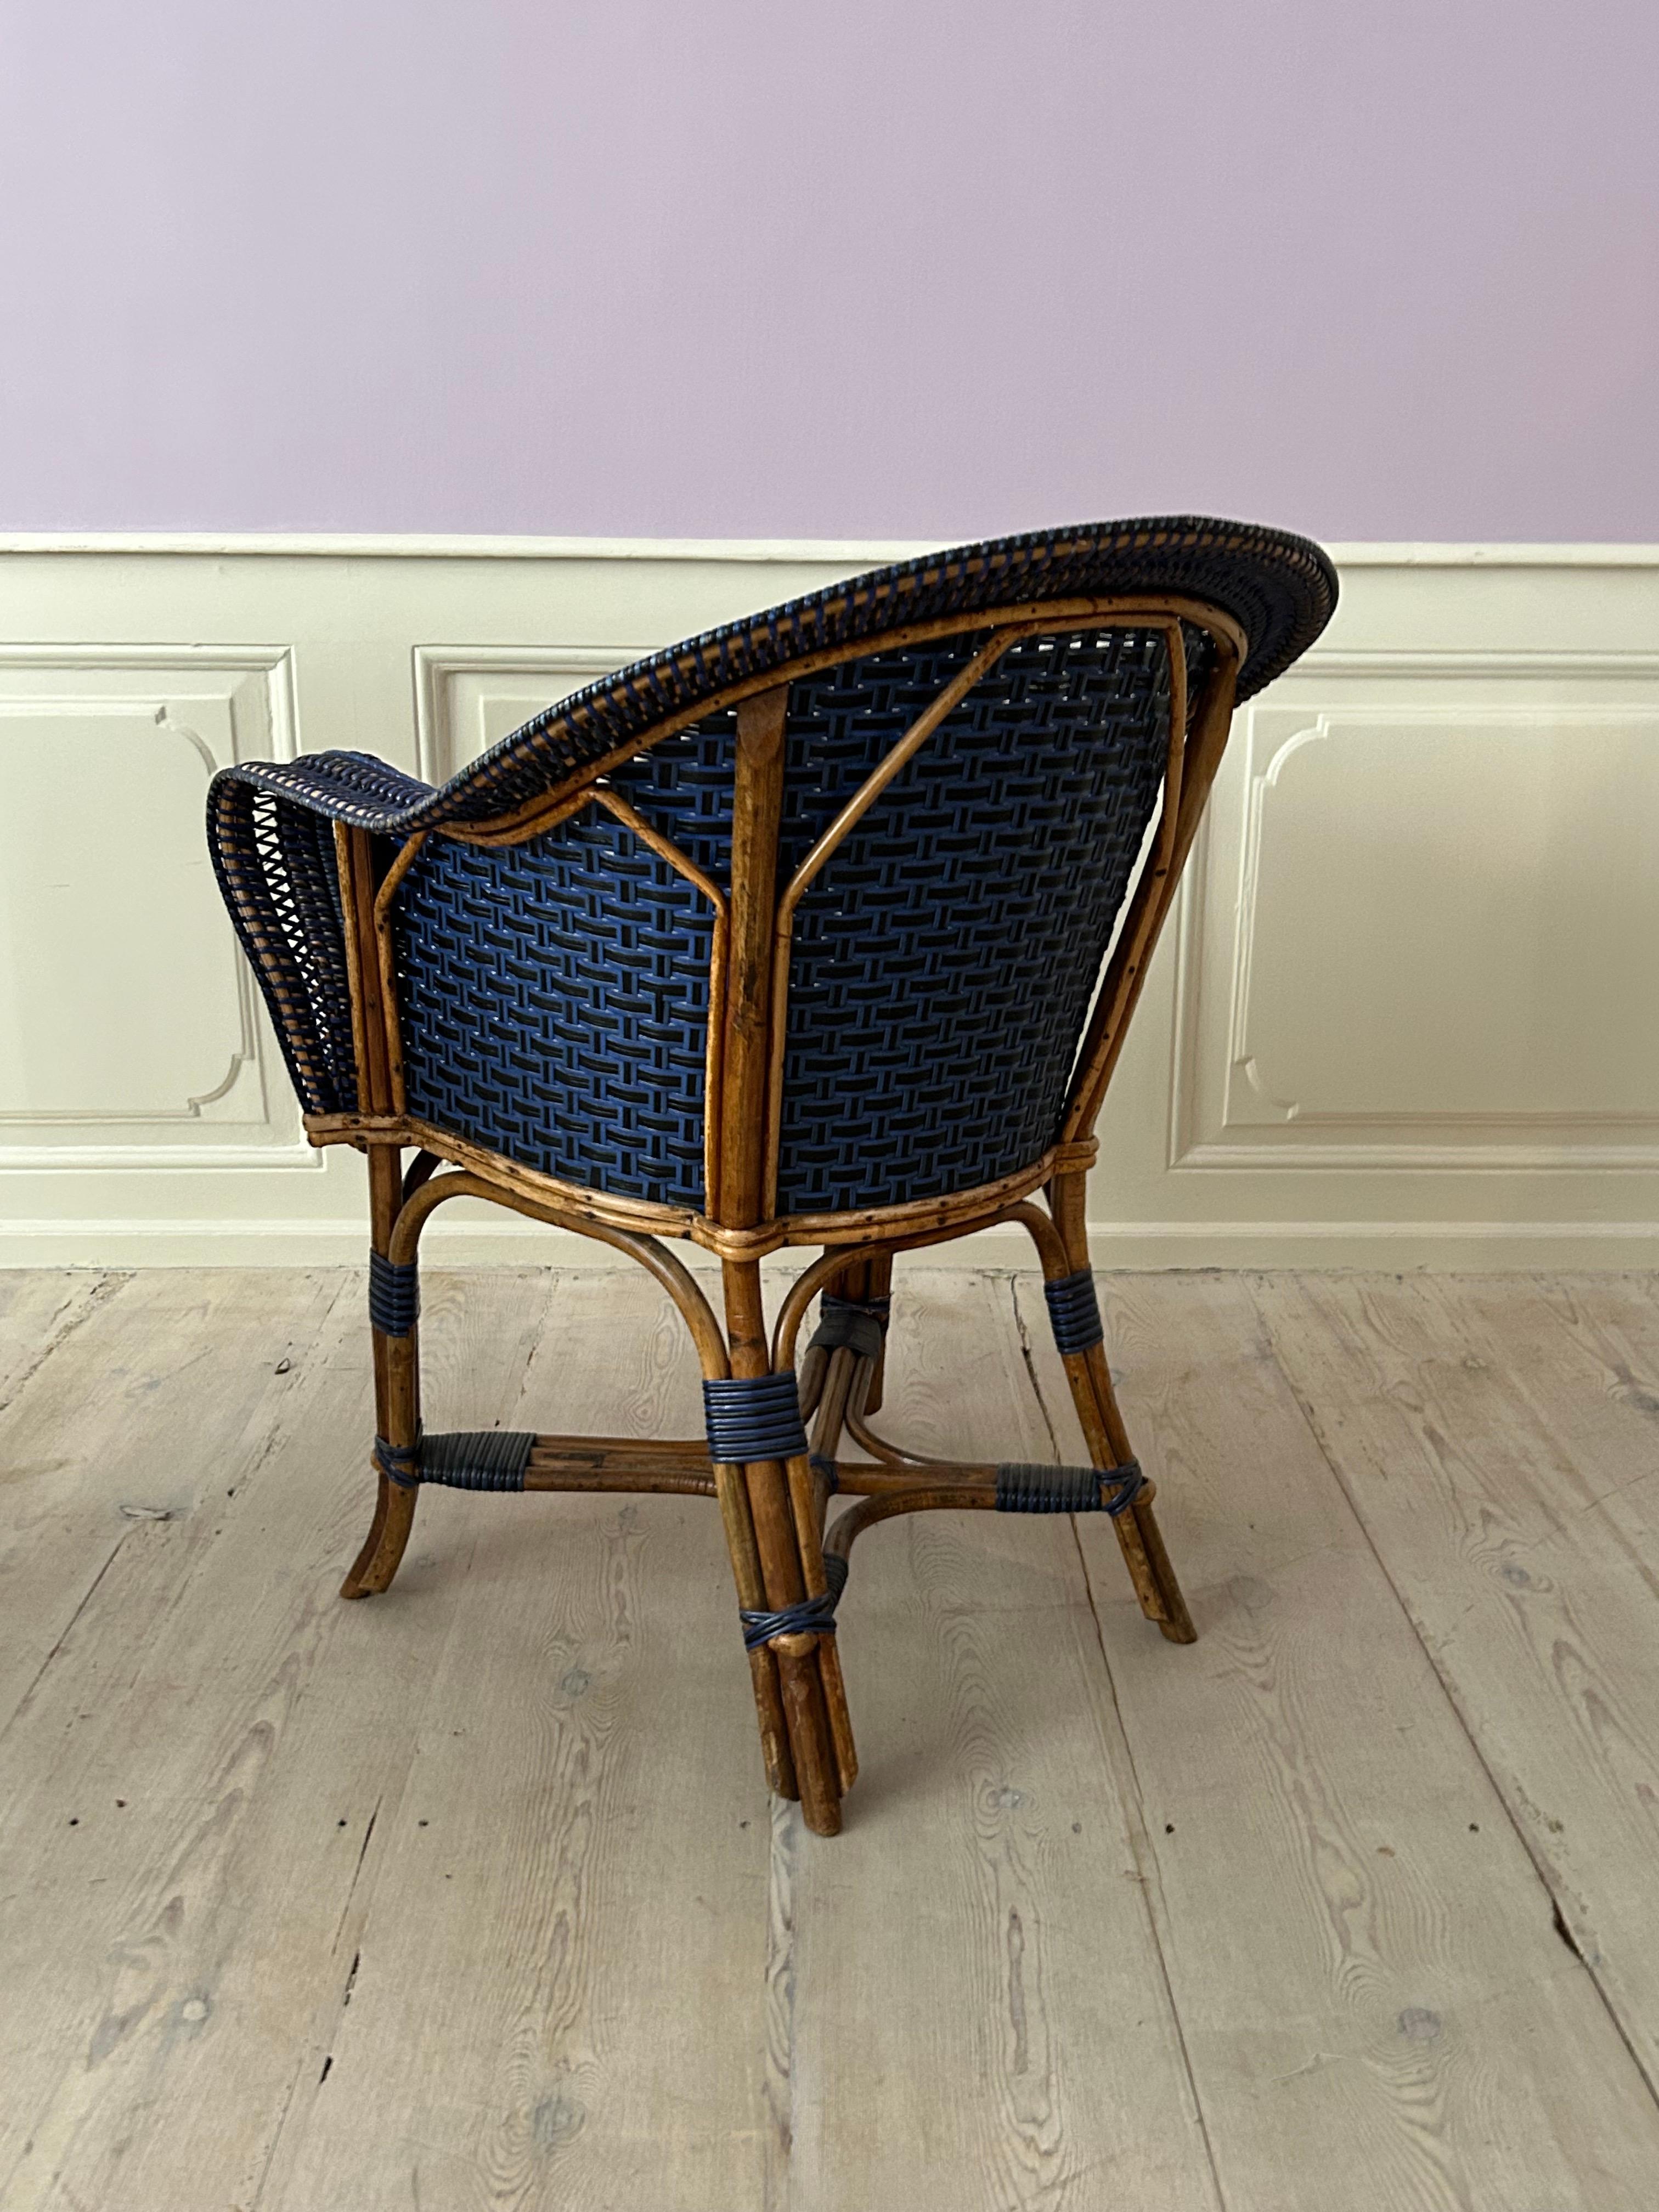 Vintage Pair of Armchairs in Blue and Black Rattan, France, Early 20th Century For Sale 8